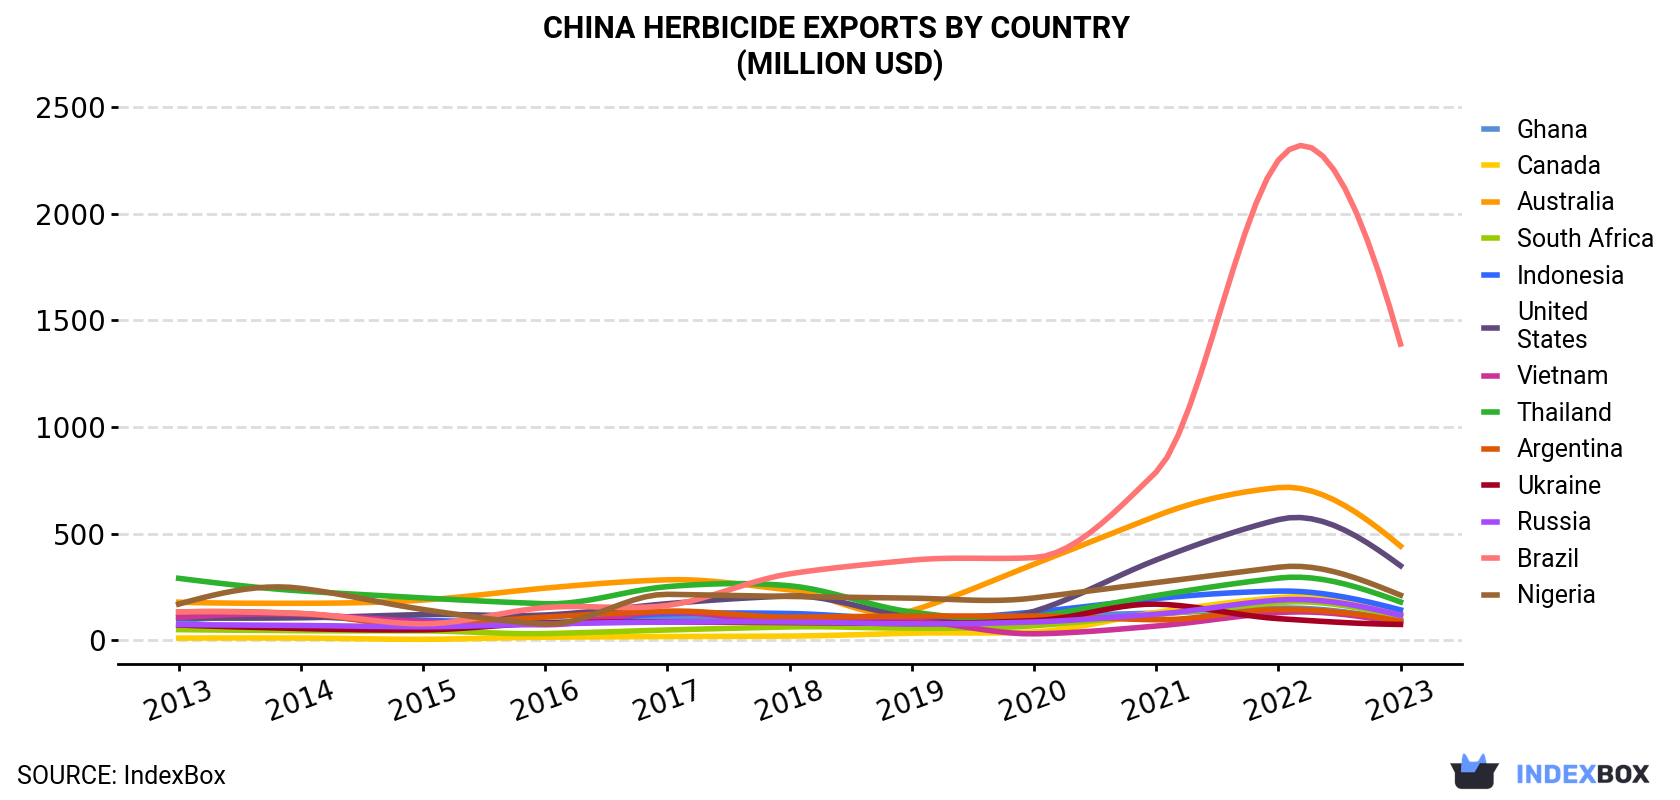 China Herbicide Exports By Country (Million USD)